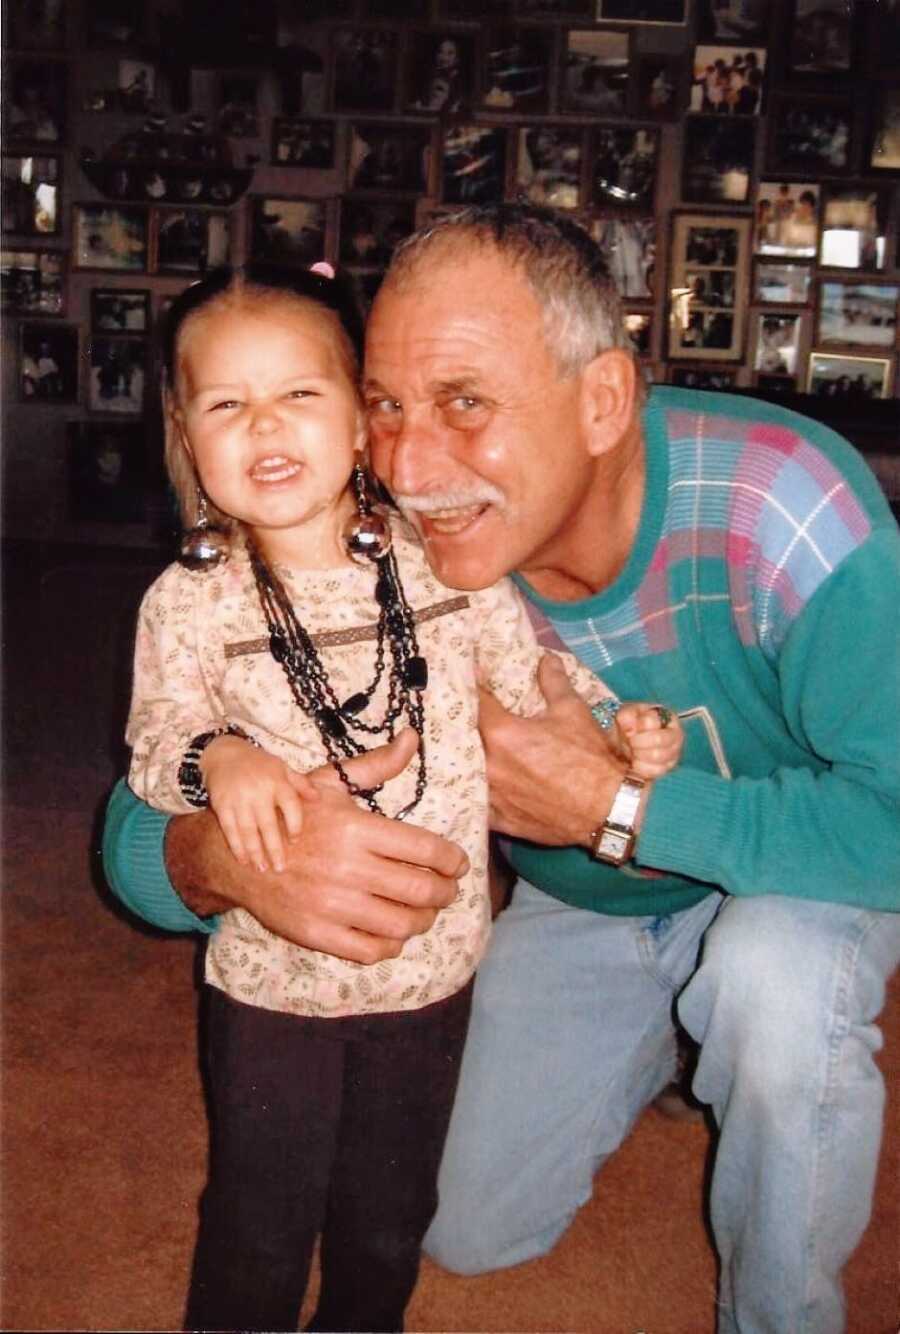 Grandpa smiles for a photo in a sweater with his granddaughter